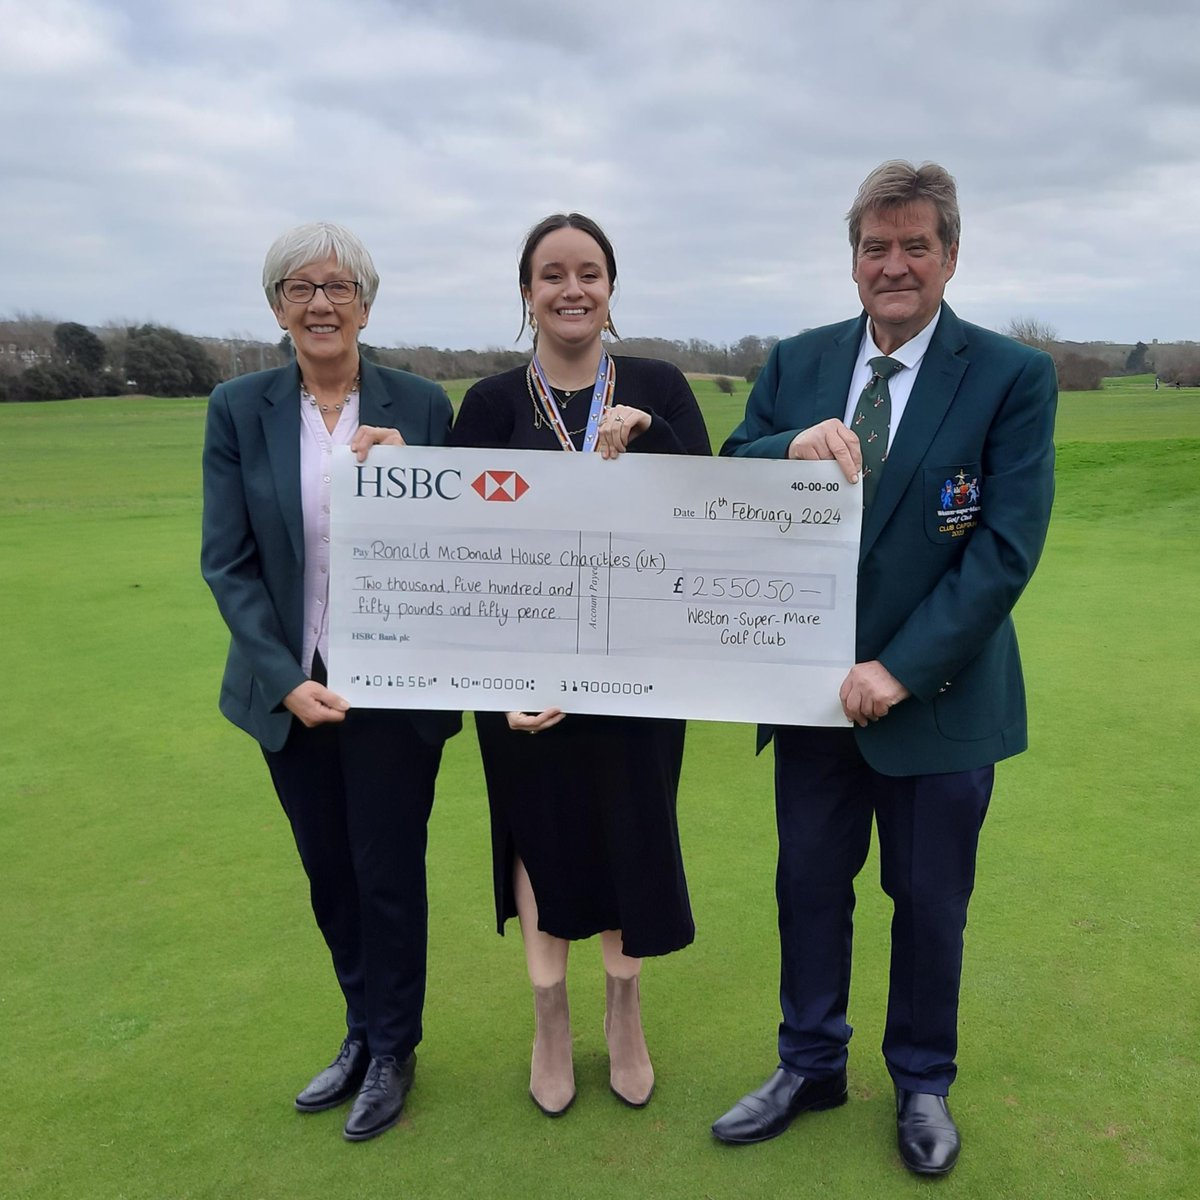 We want to say a massive thank you to @wsmgolfclub, who raised more than £2,500 for our Charity! 🤩❤️ They managed to raise this amazing amount of money by hosting charity golf days, having raffles and one of the club members even did dry January. 👏⛳